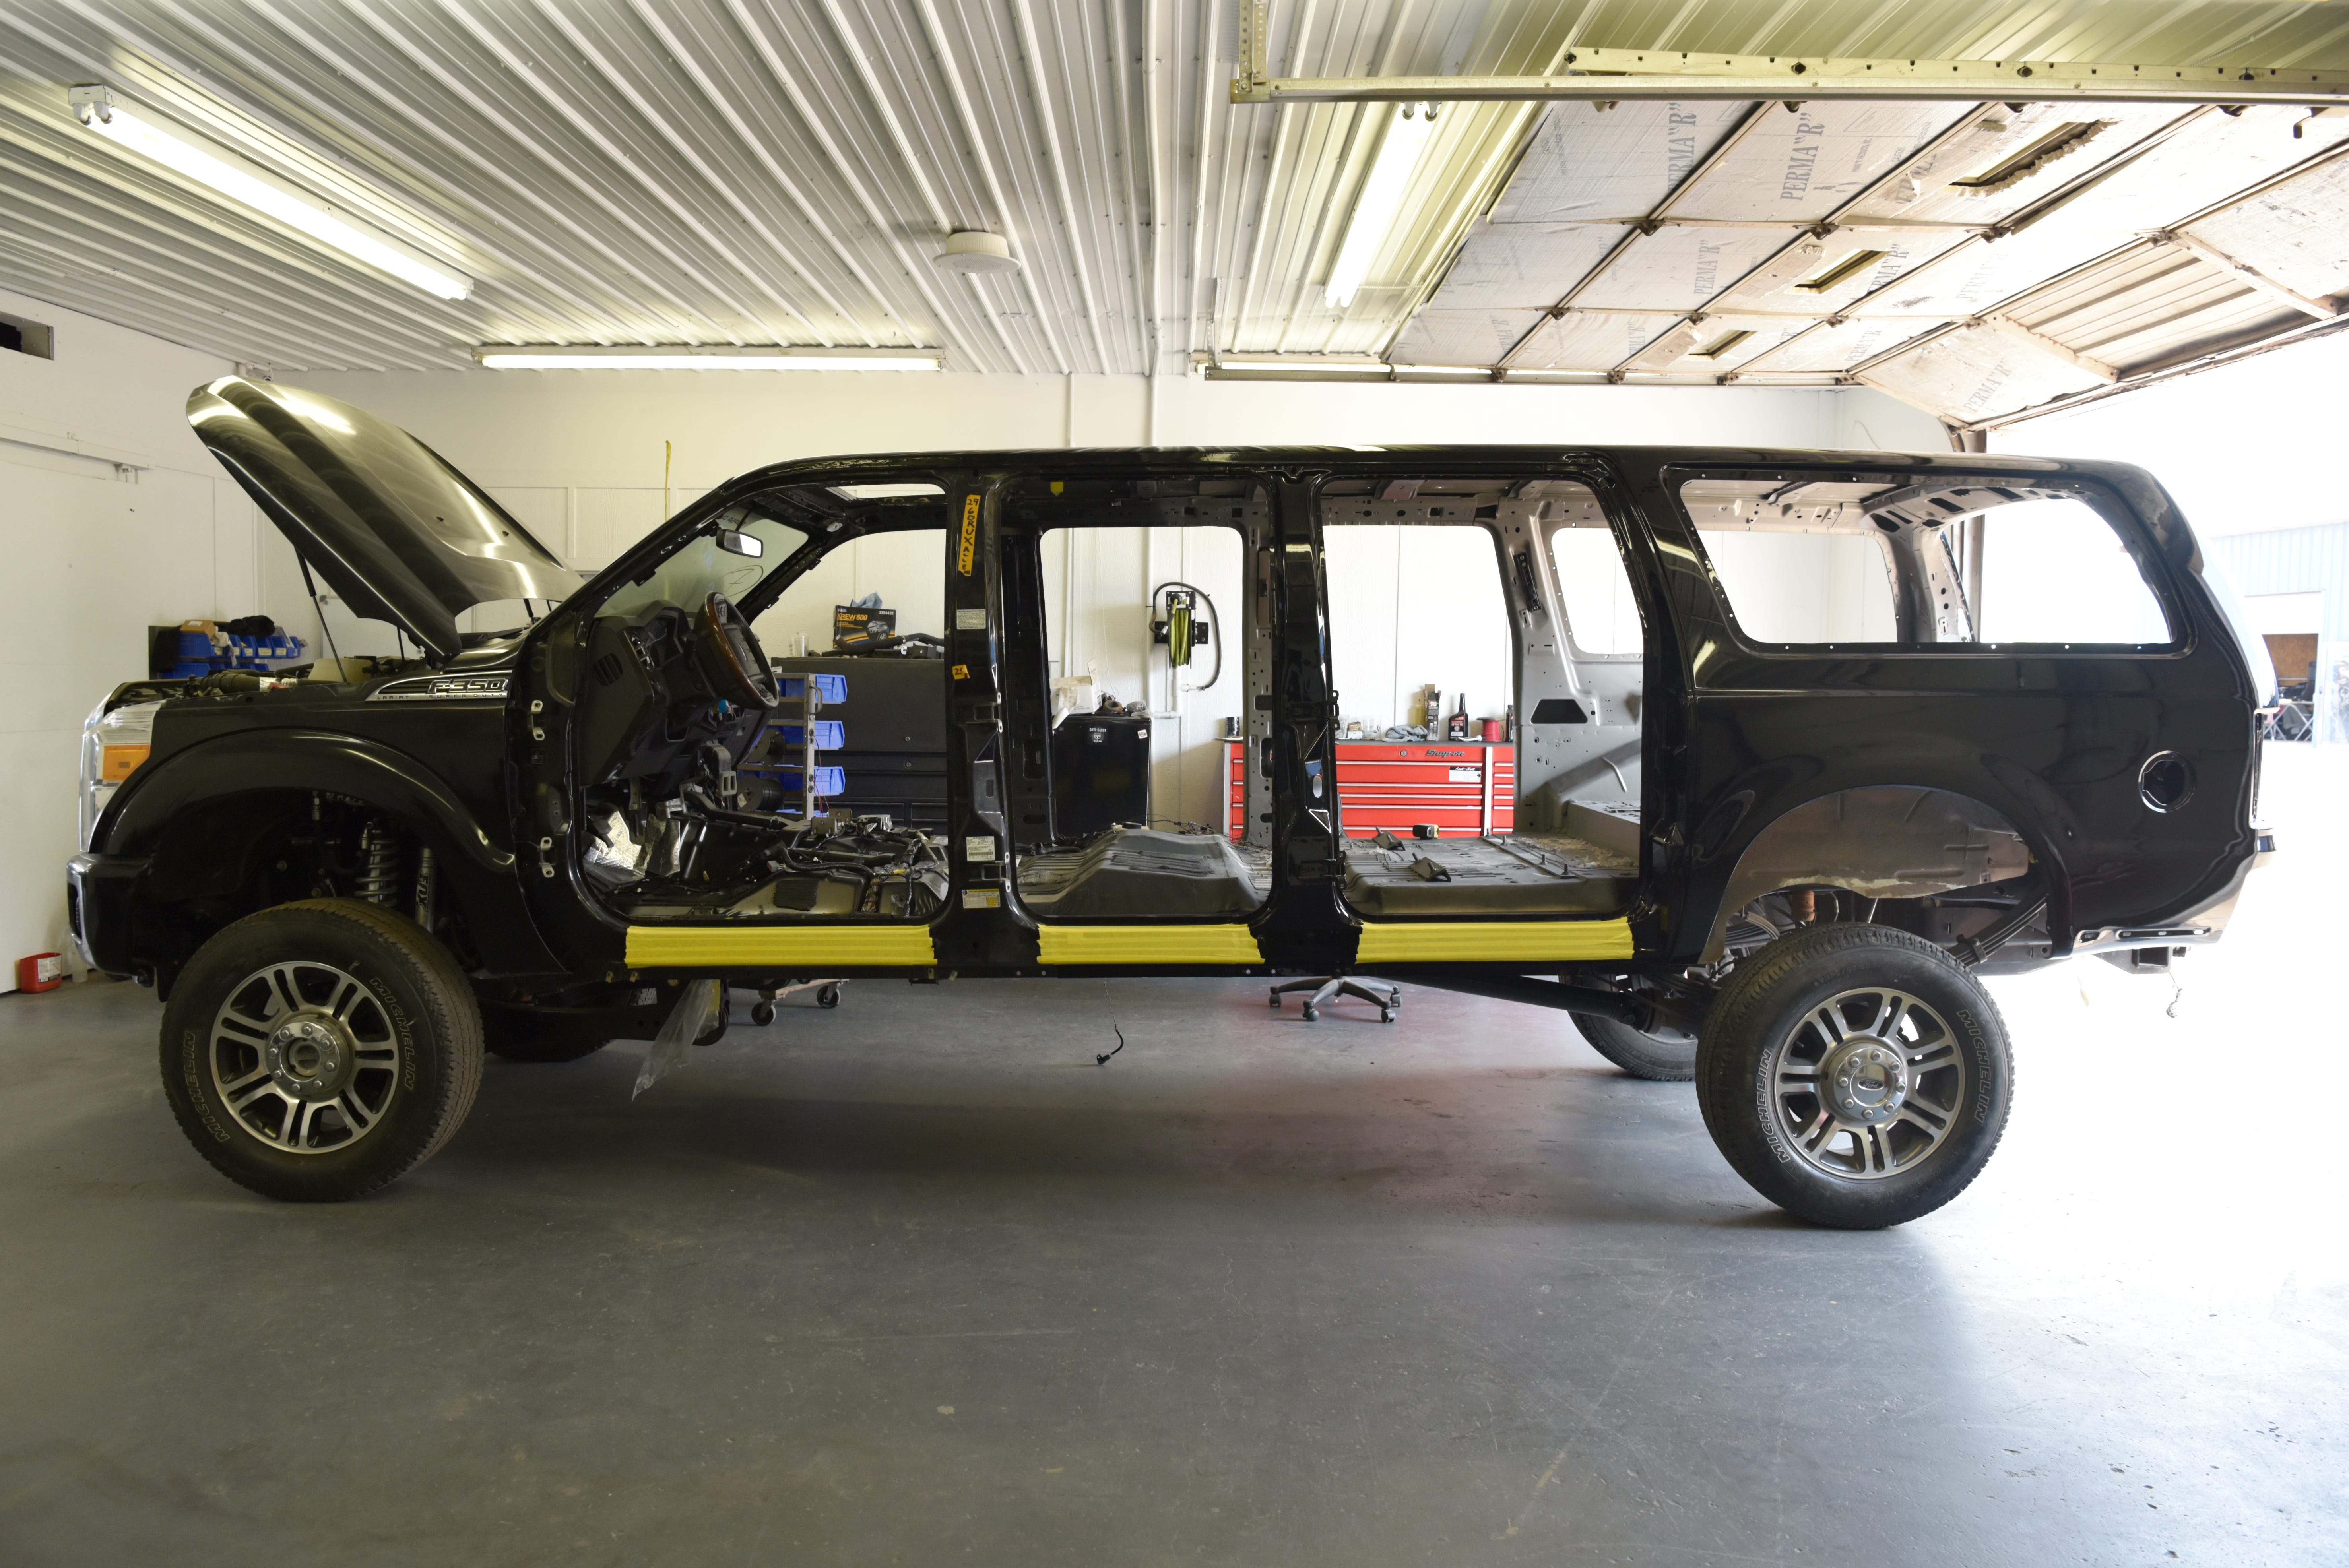 A custom six-door Ford Excursion waits to be outfitted with an interior at Custom Autos By Tim in Guthrie, Oklahoma.